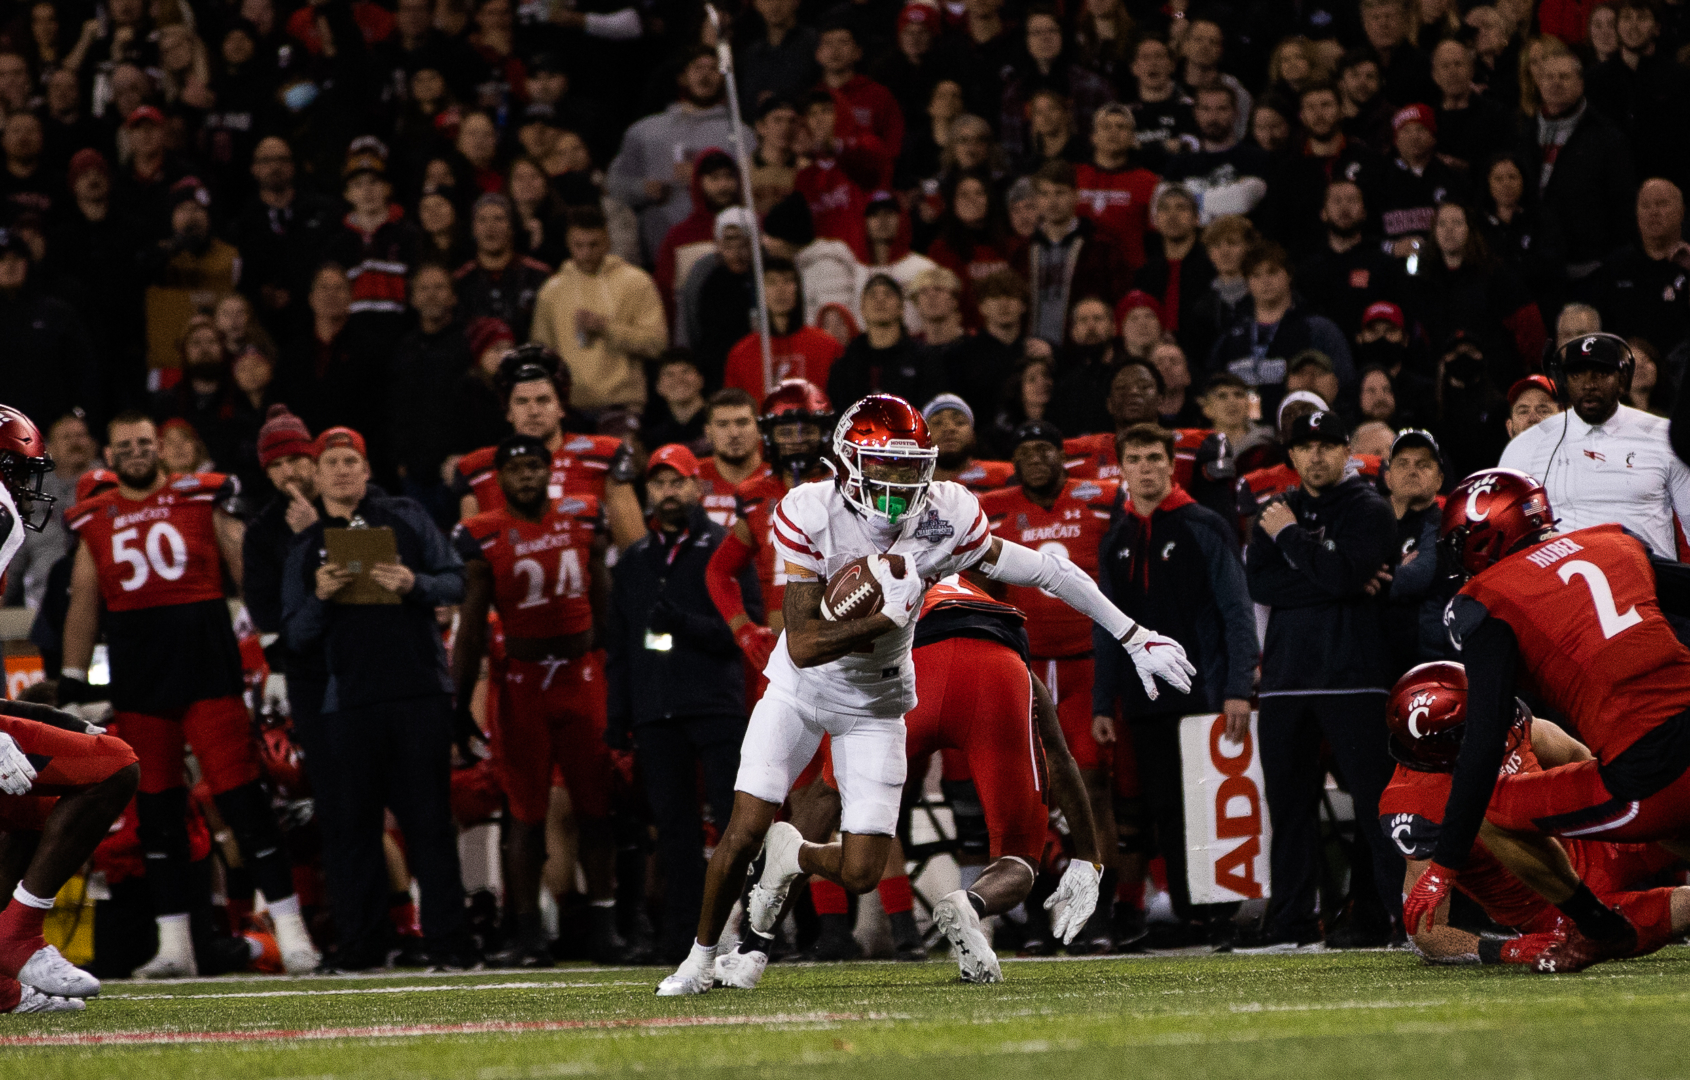 Sophomore receiver Tank Dell led the way for UH in receptions, receiving yards and receiving touchdowns in 2021. | Sean Thomas/The Cougar